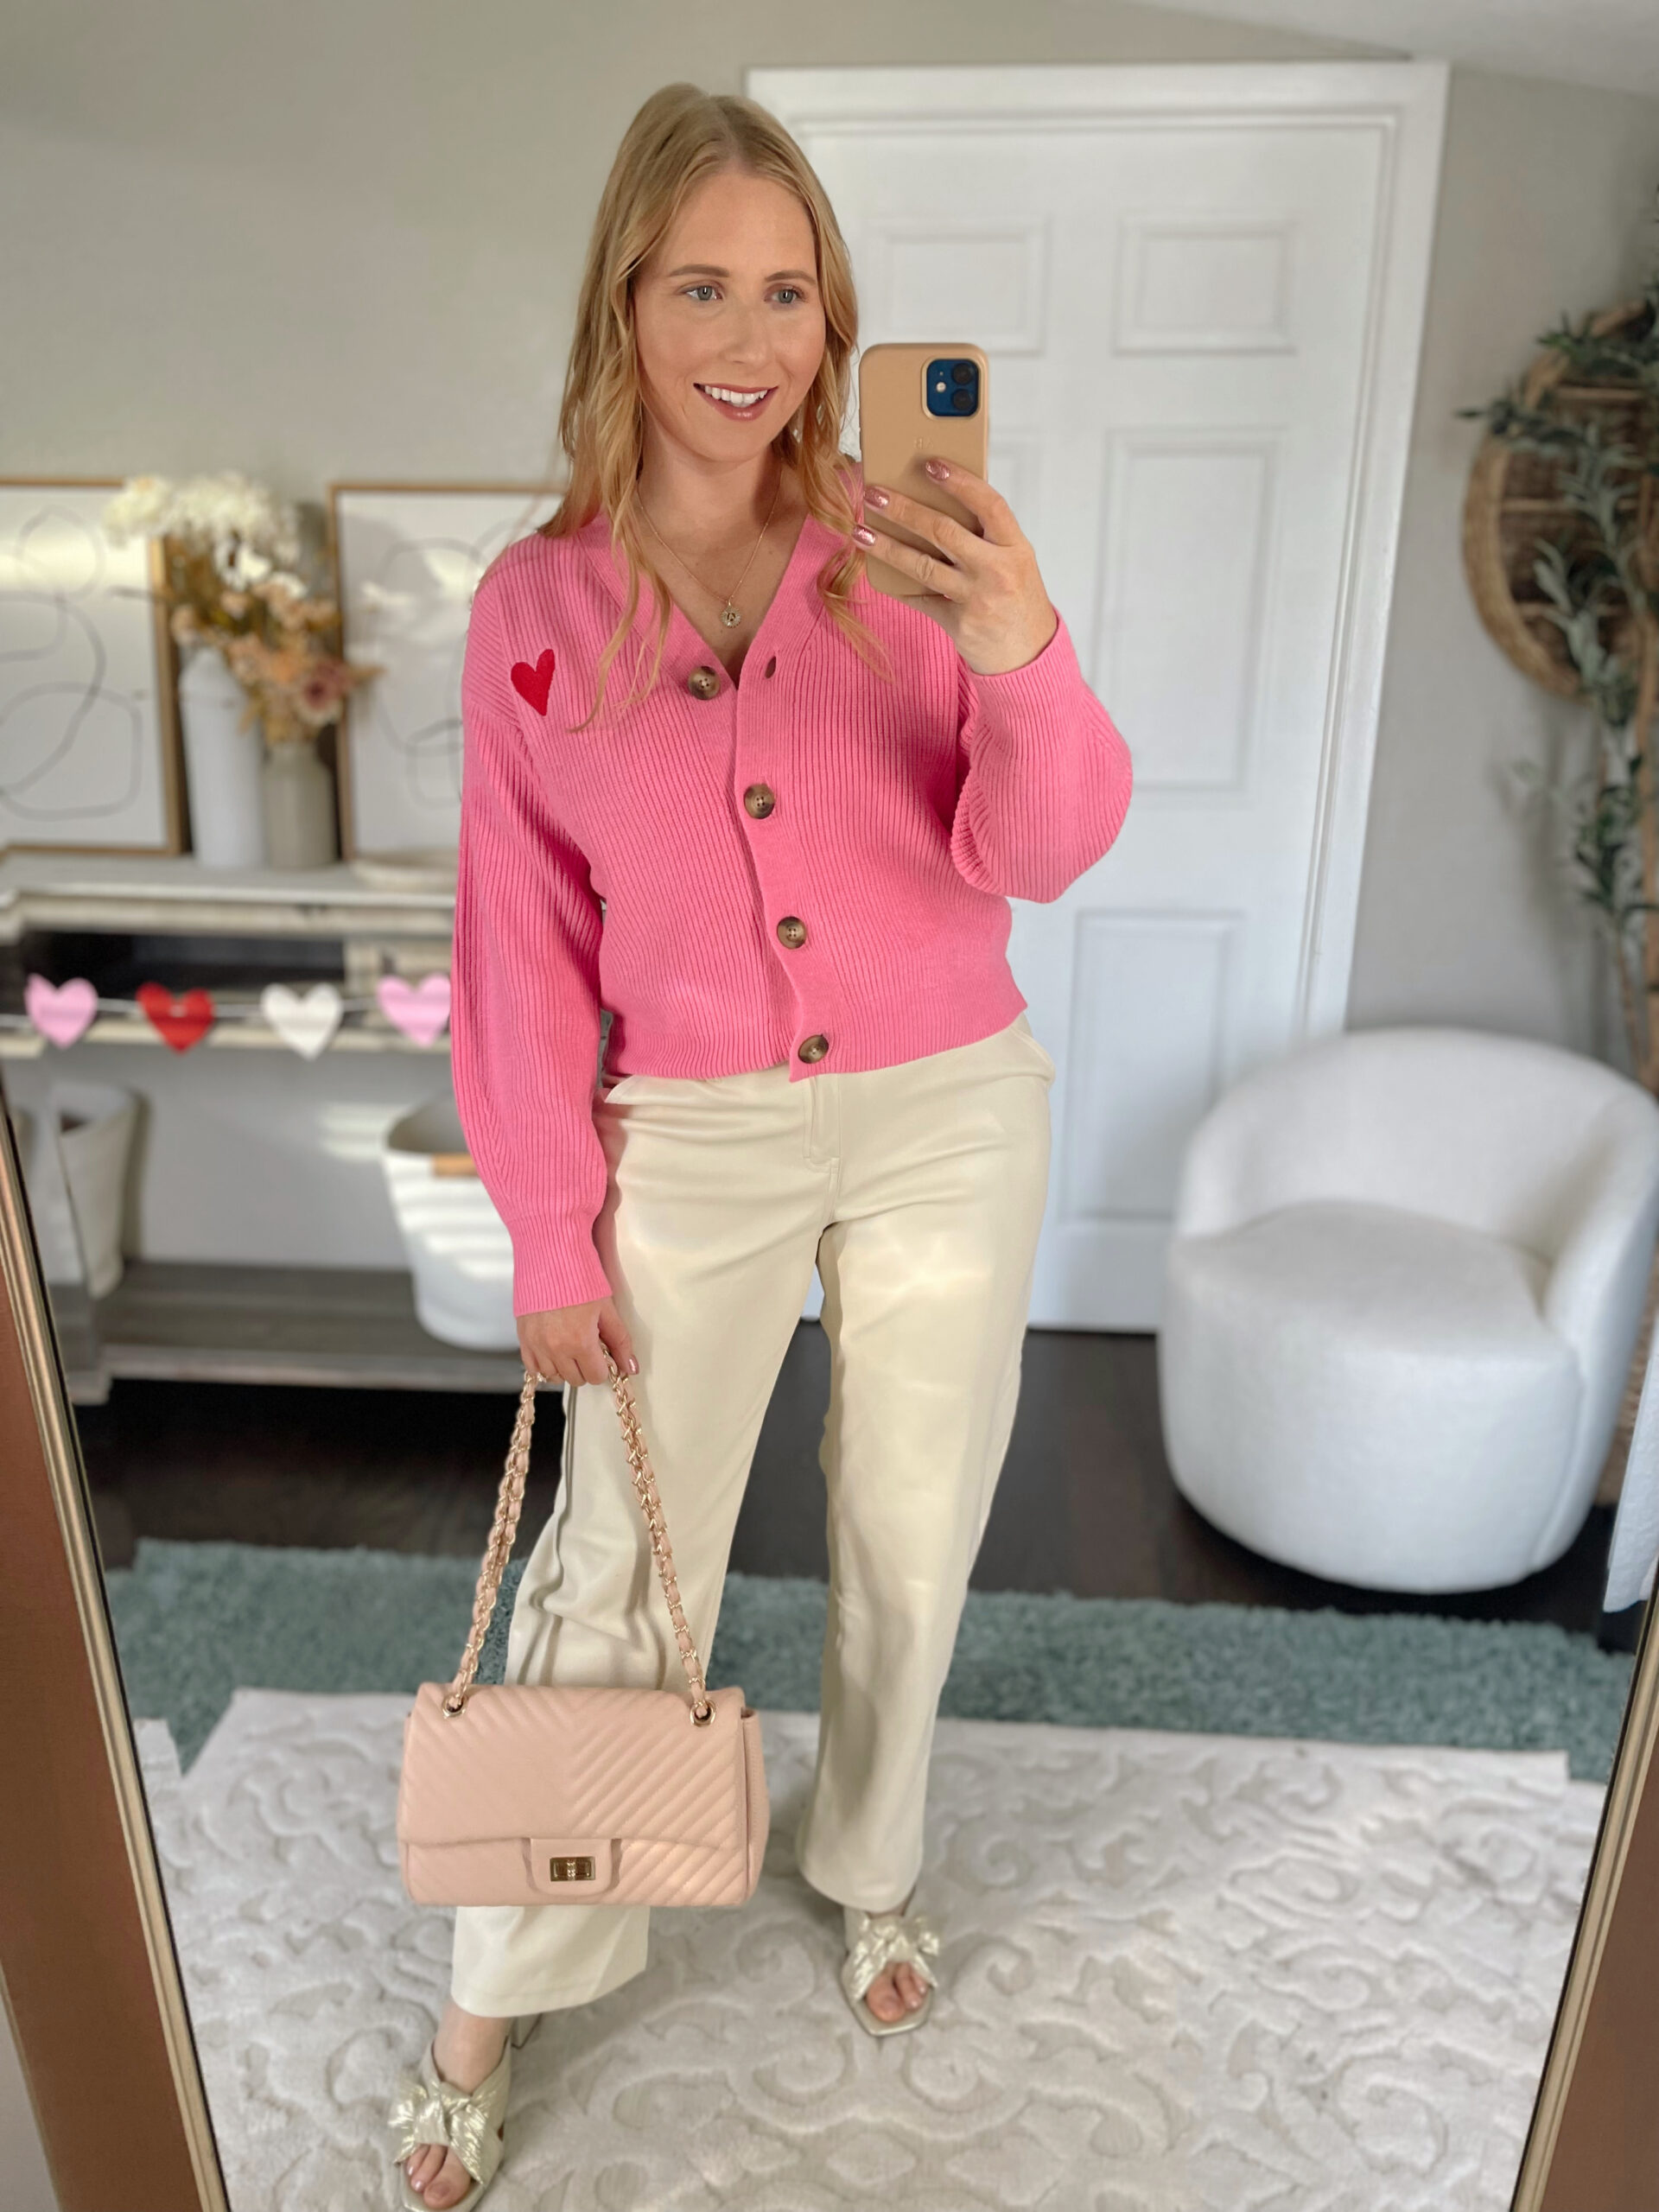 Barbiecore Fashion Trend - Hot Pink Cardigan Sweater, Cream Faux Leather Pants